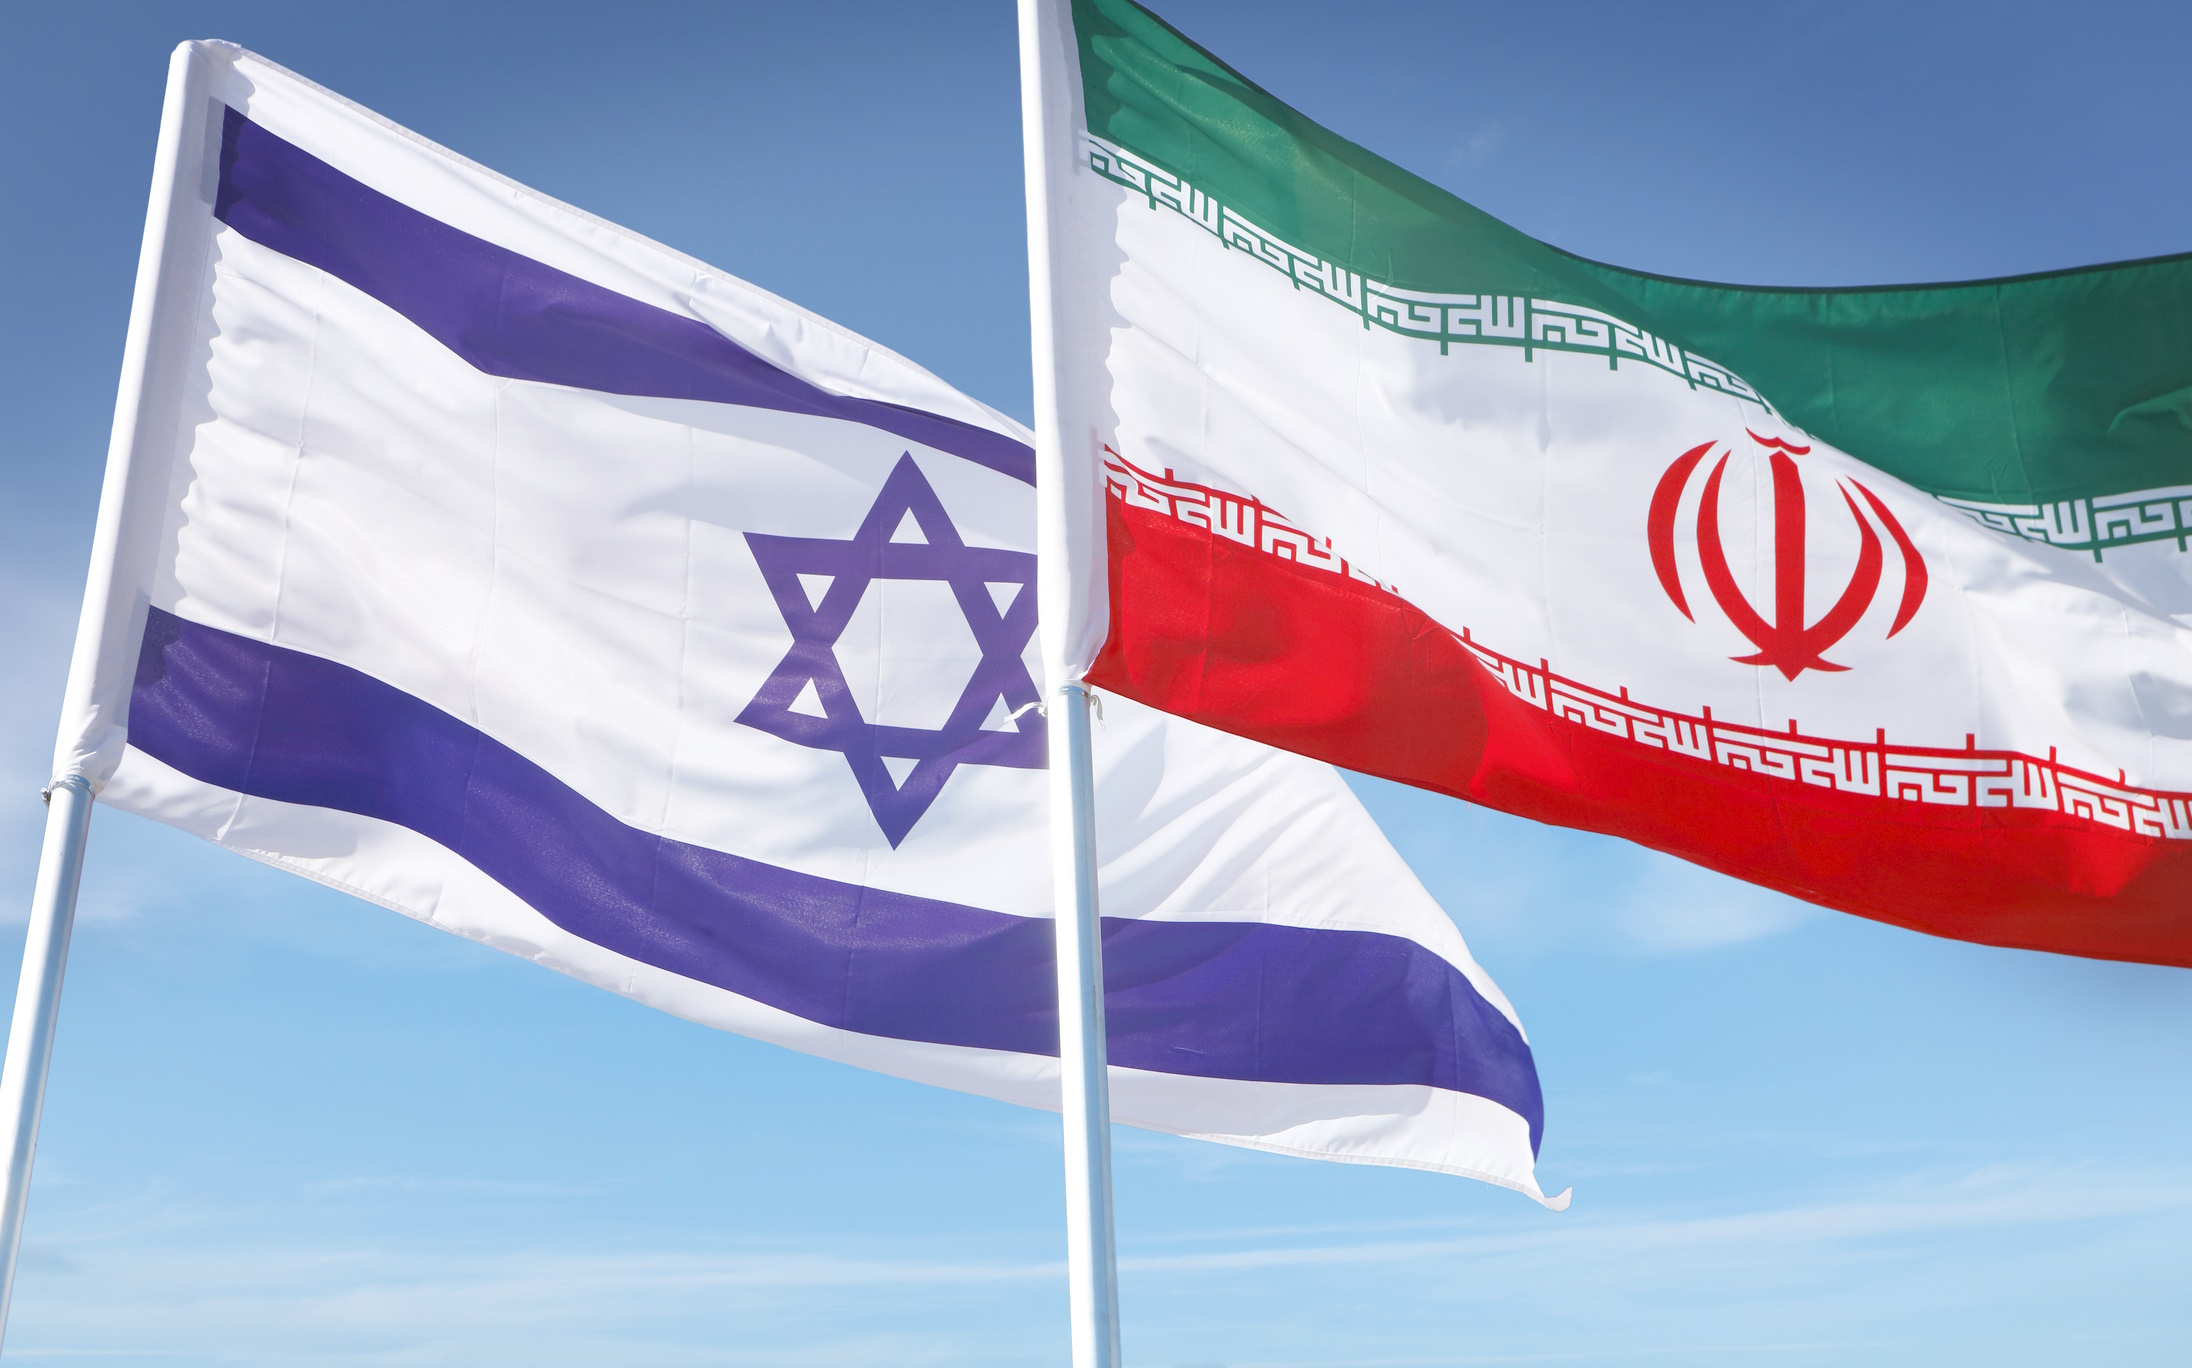 Will there be a war between Iran and Israel?